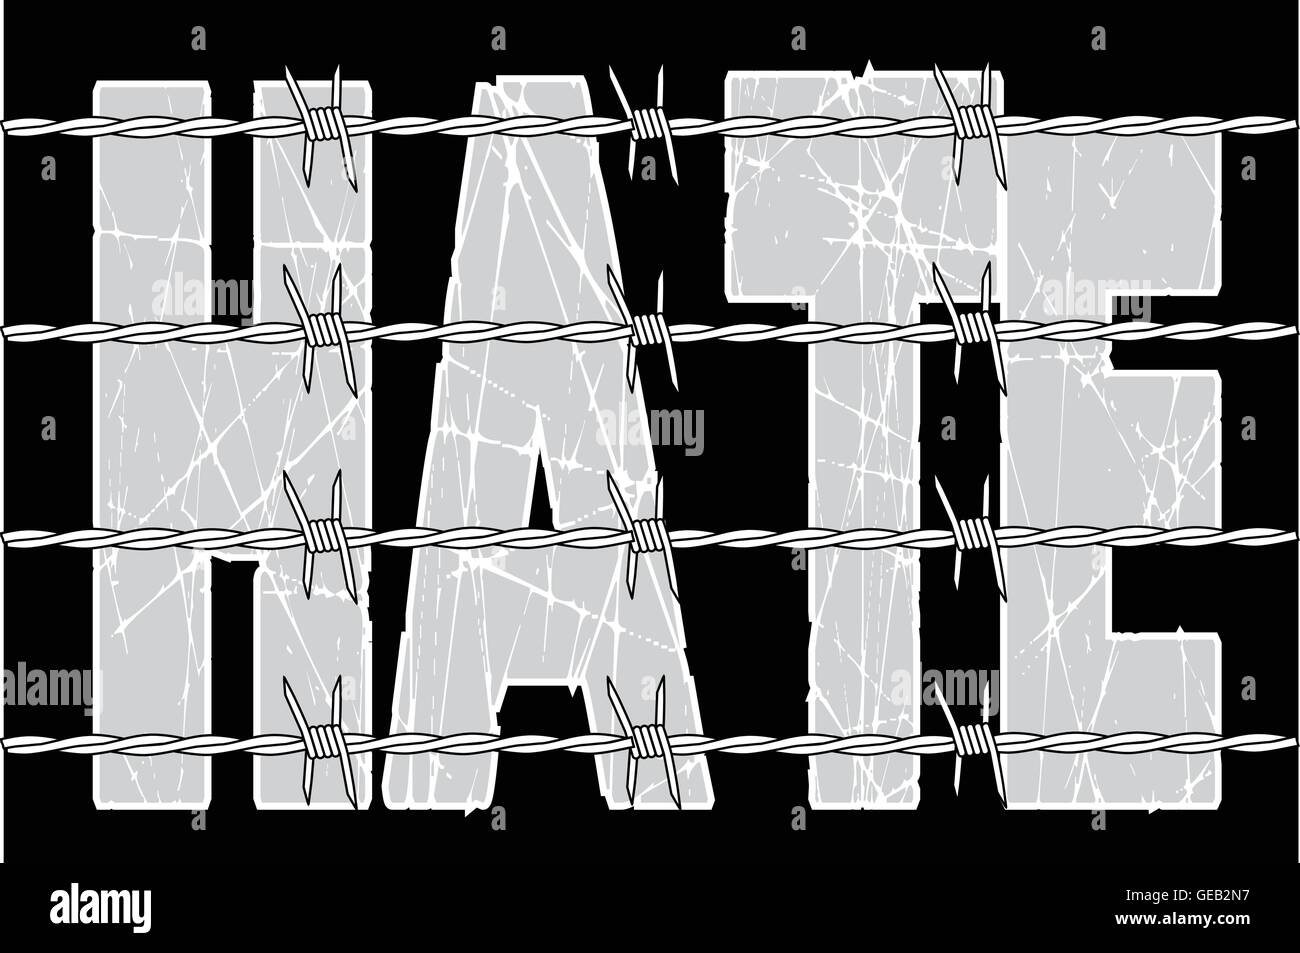 The word hate behind a barbed wire fence over a black background Stock Vector